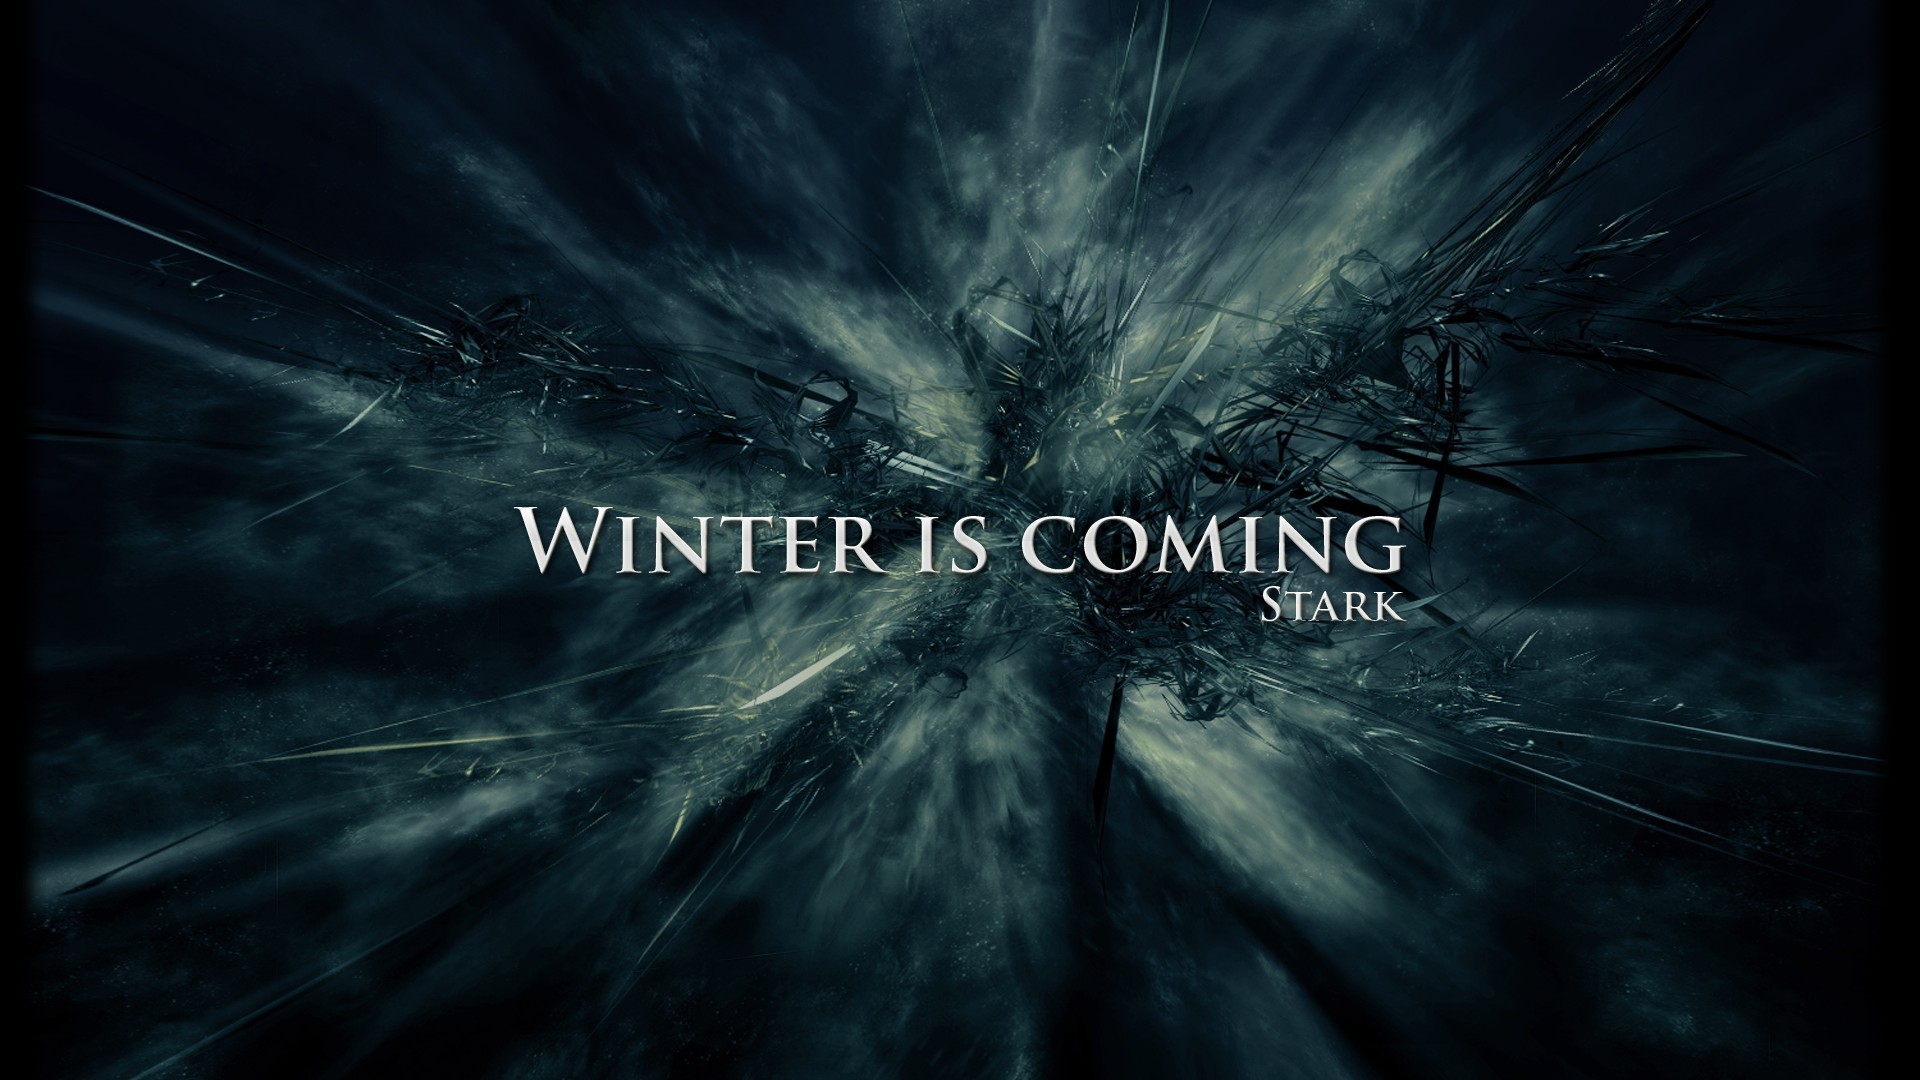 Game Of Thrones A Song Of Ice And Fire House Stark Winter Is Coming 1920x1080